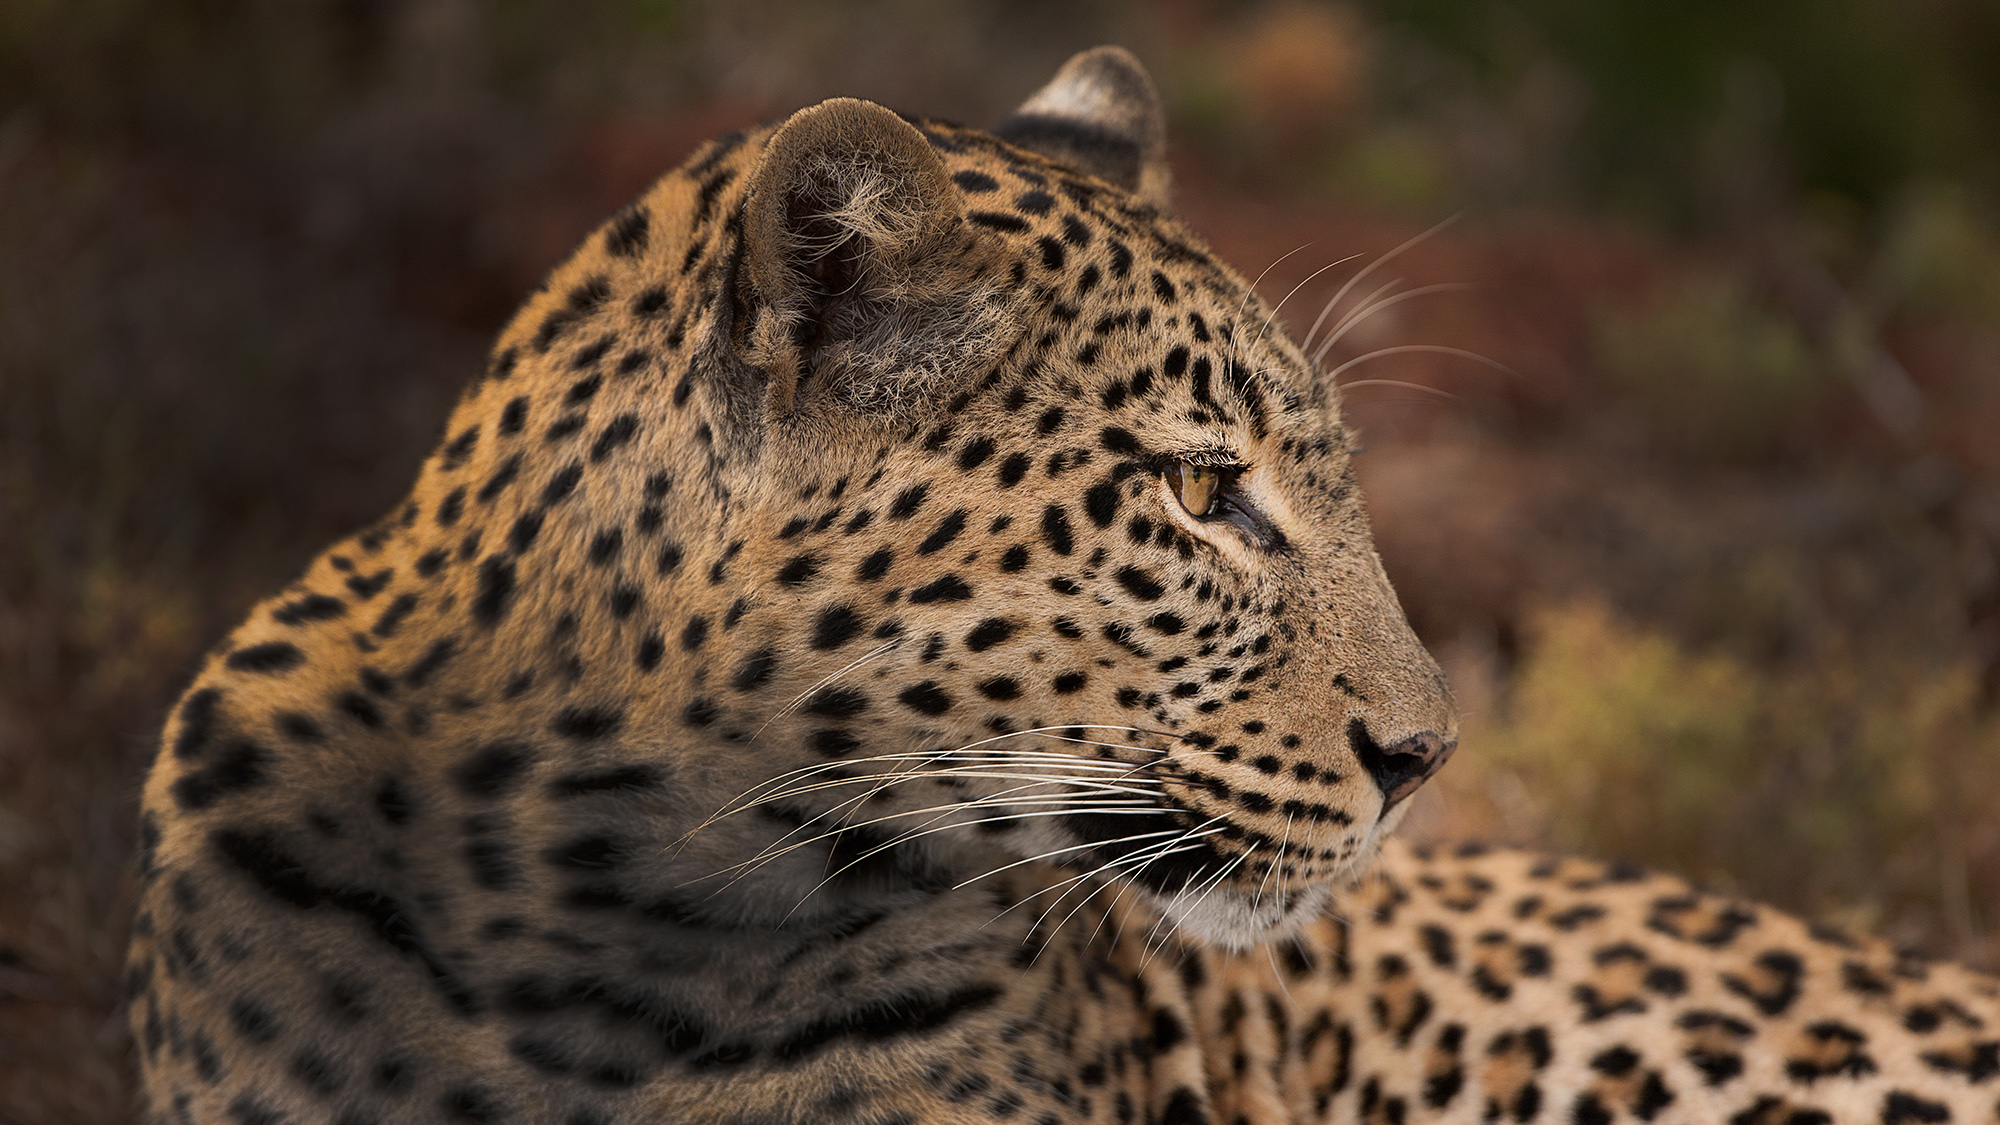 Close up image of the head and upper back of a leopard in the wild, looking to the right